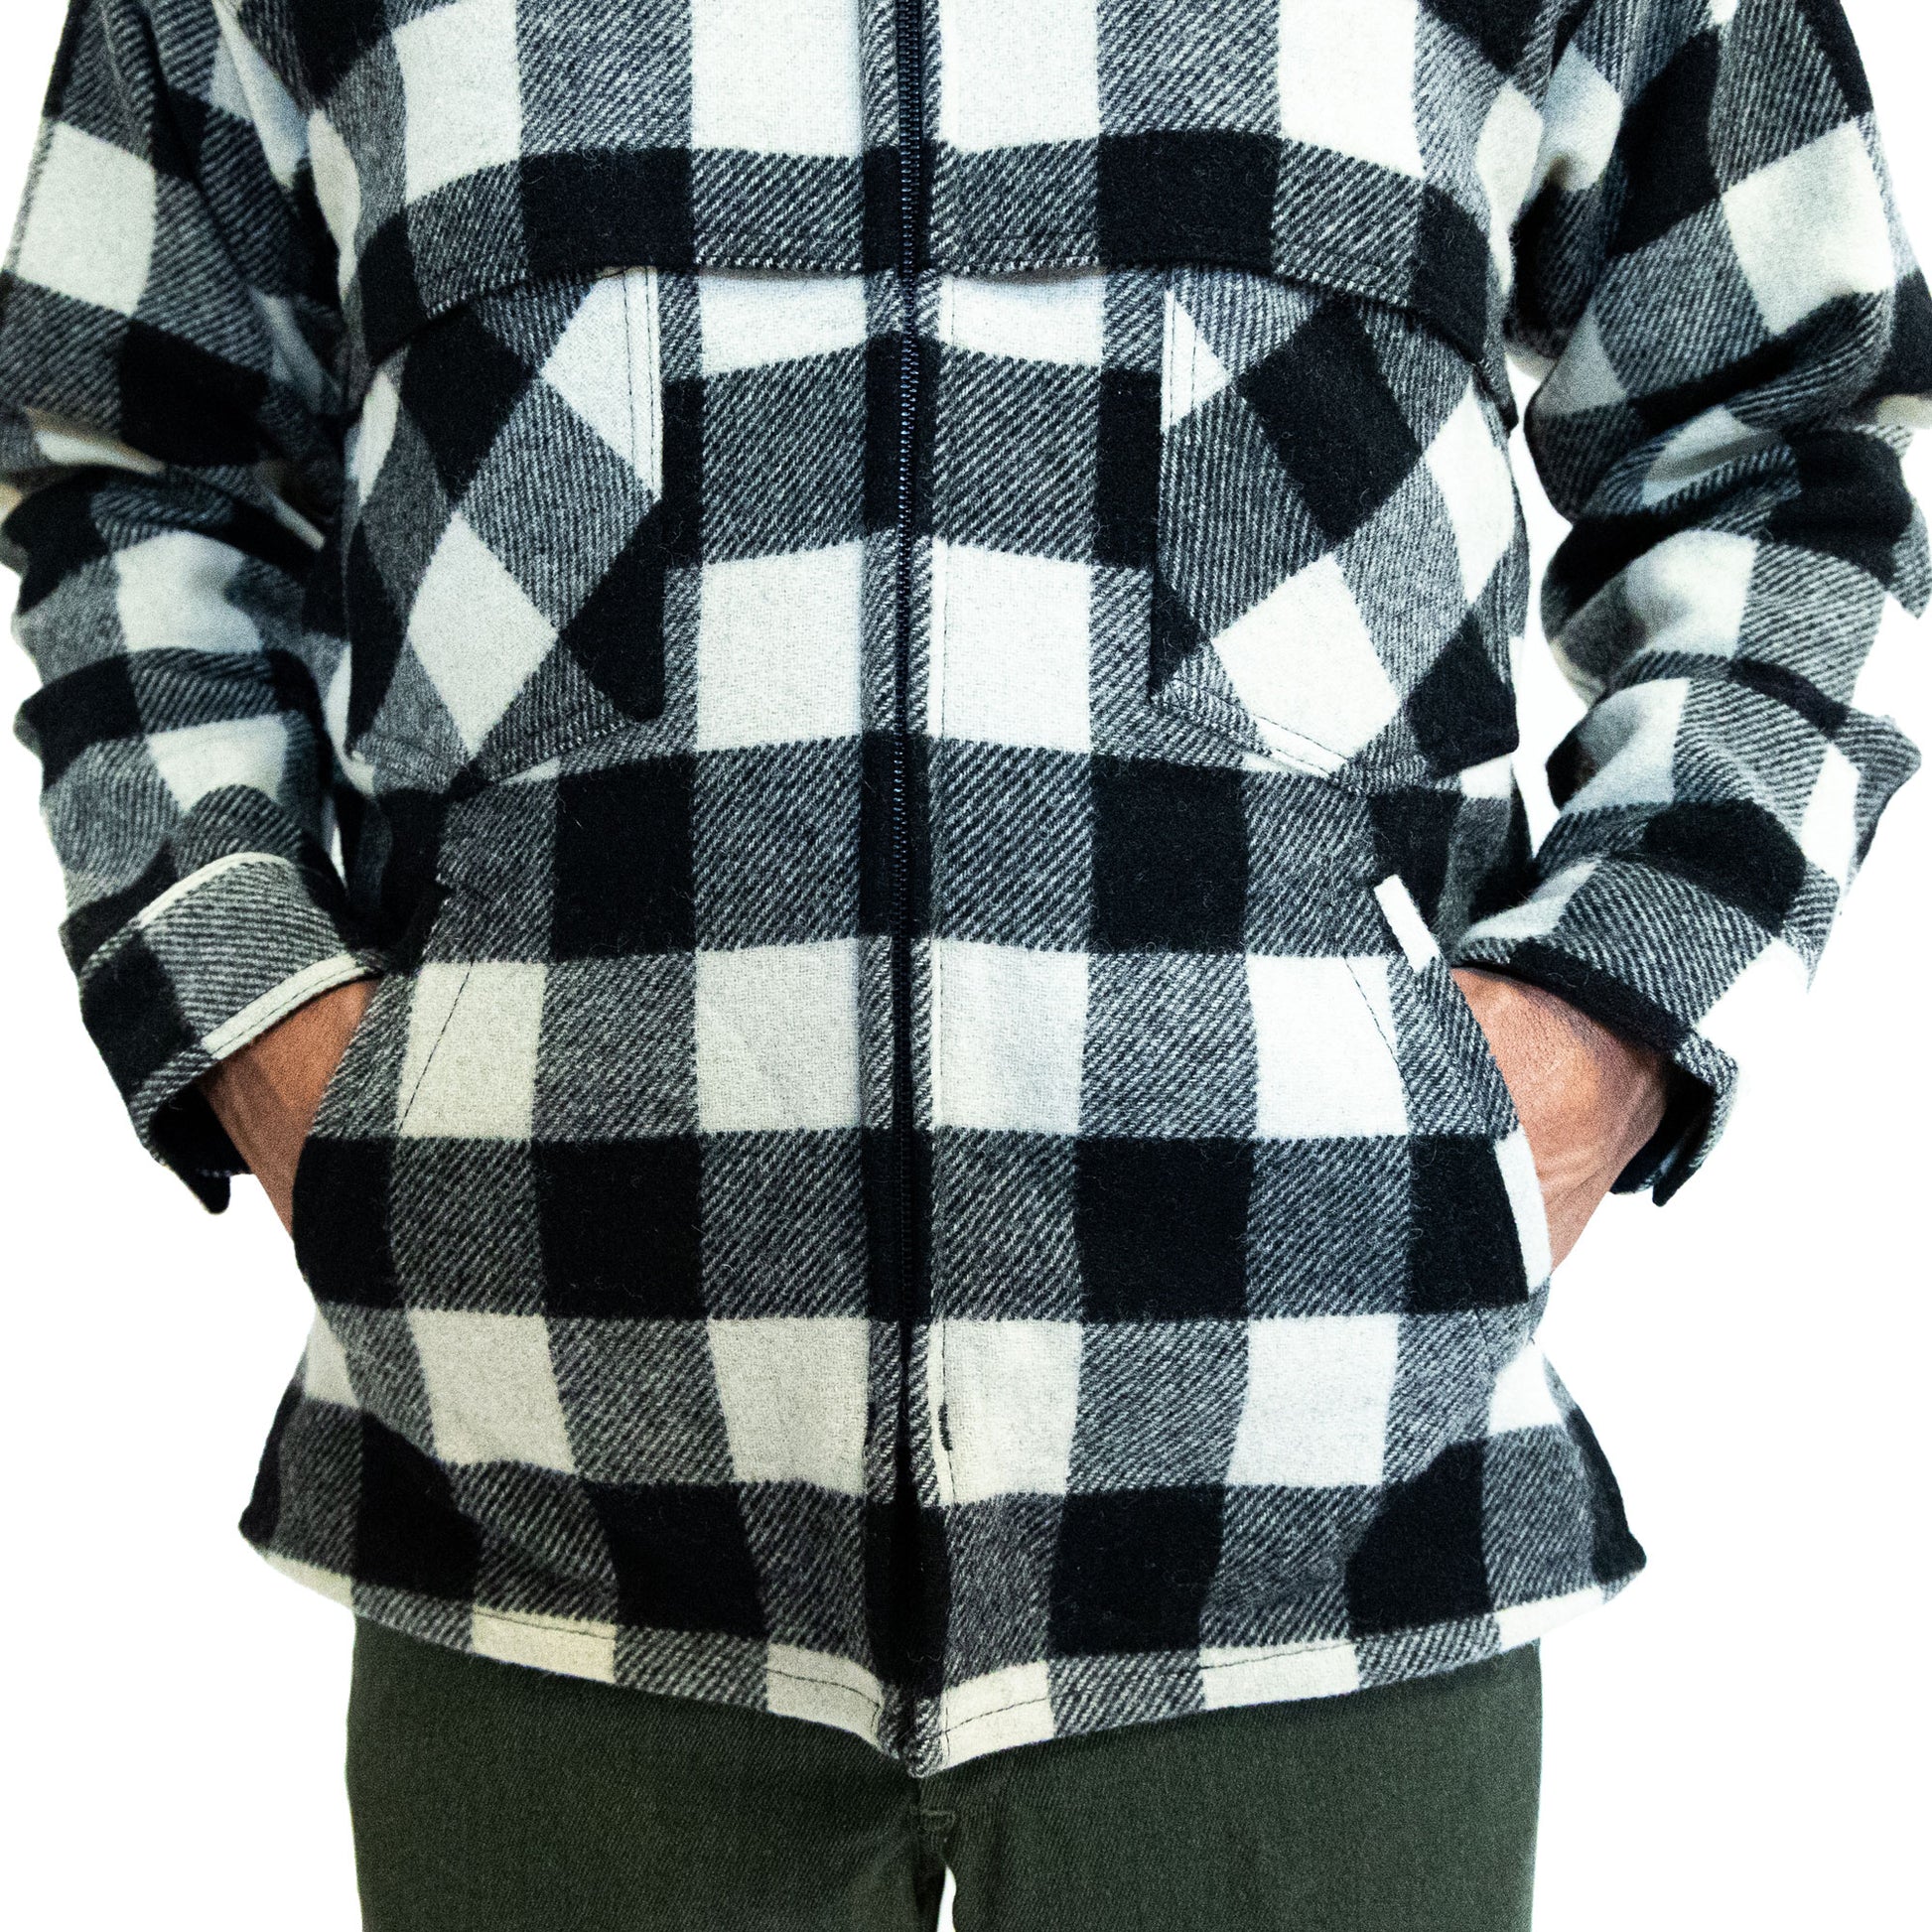 Johnson Woolen Mills northwoods x 1842 white and black buffalo check jac shirt on model with hands in pockets